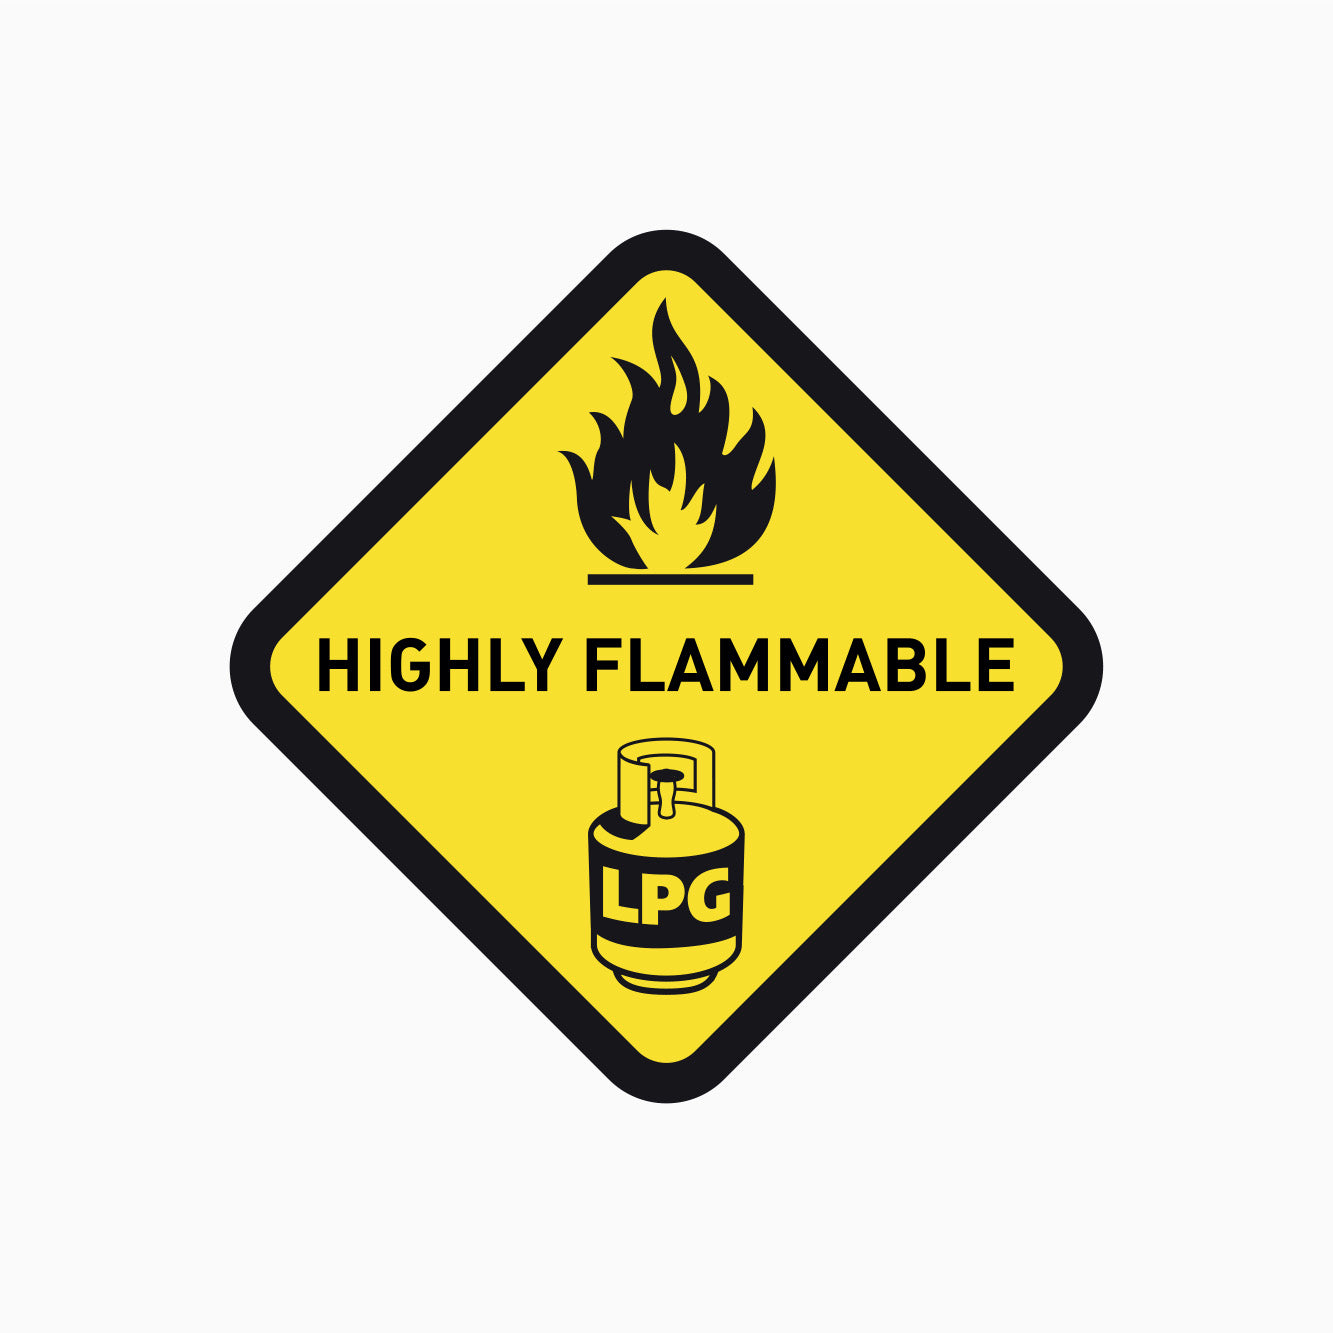 LPG SIGN - HIGHLY FLAMMABLE SIGN